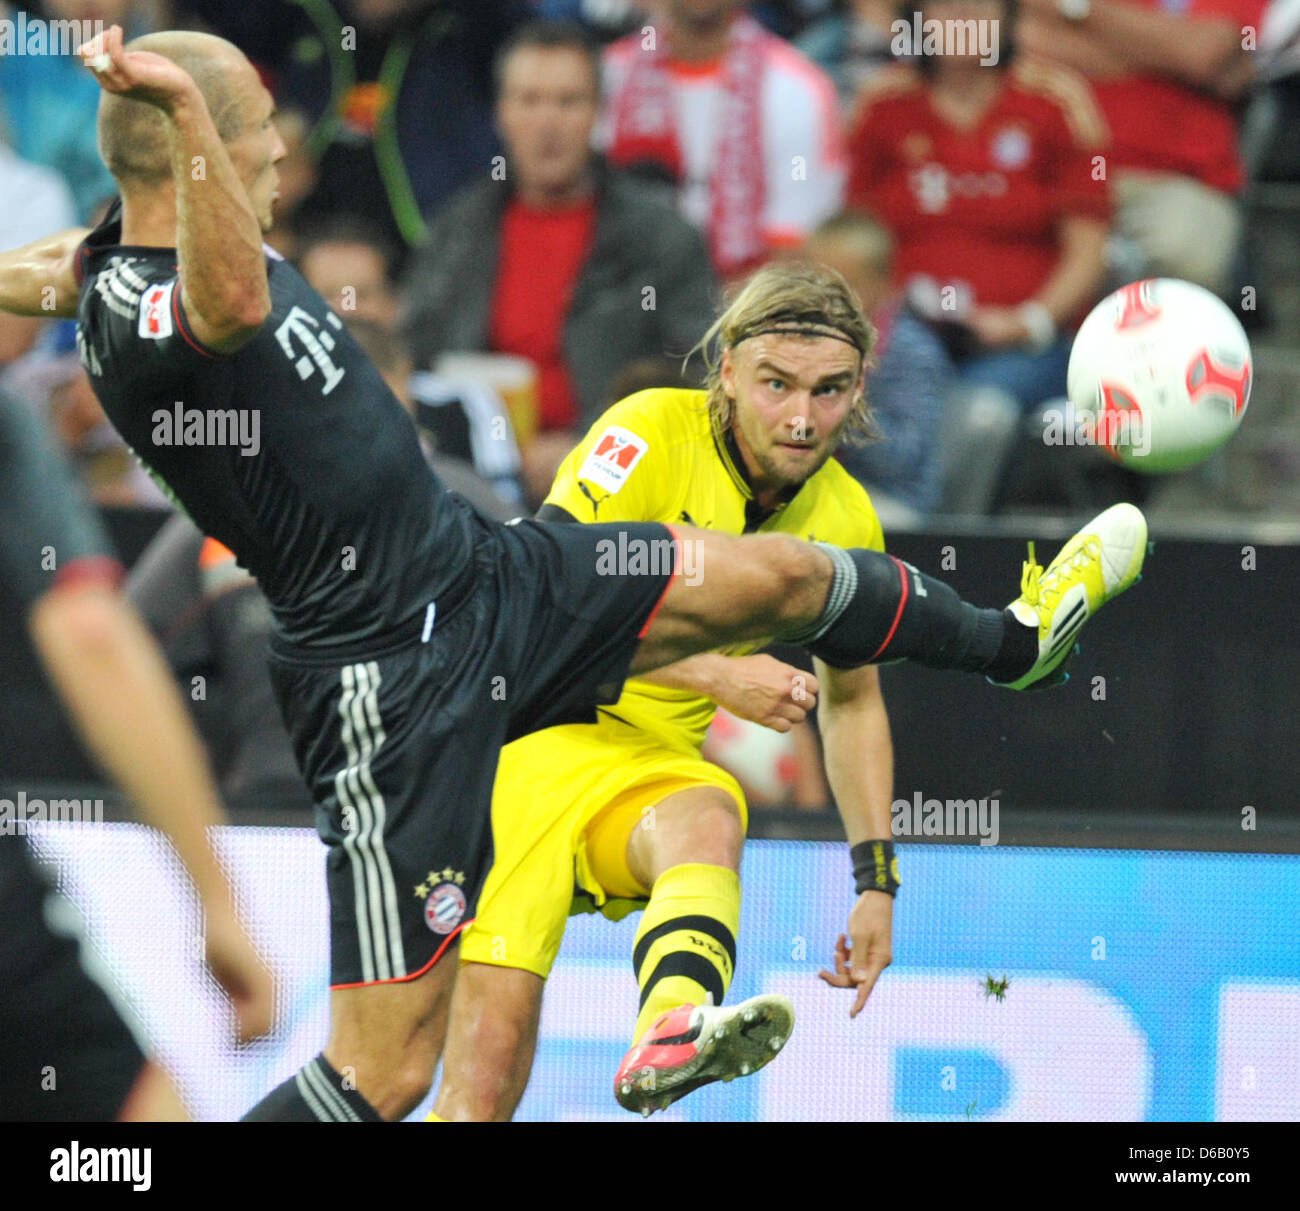 Munich's Arjen Robben (L) vies for the ball with Dortmund's during the DFL Super Cup match between FC Bayern Munich and Borussia Dortmund at the Allianz Arena in Munich, Germany, 12 August 2012. Photo: Frank Leonhardt Stock Photo